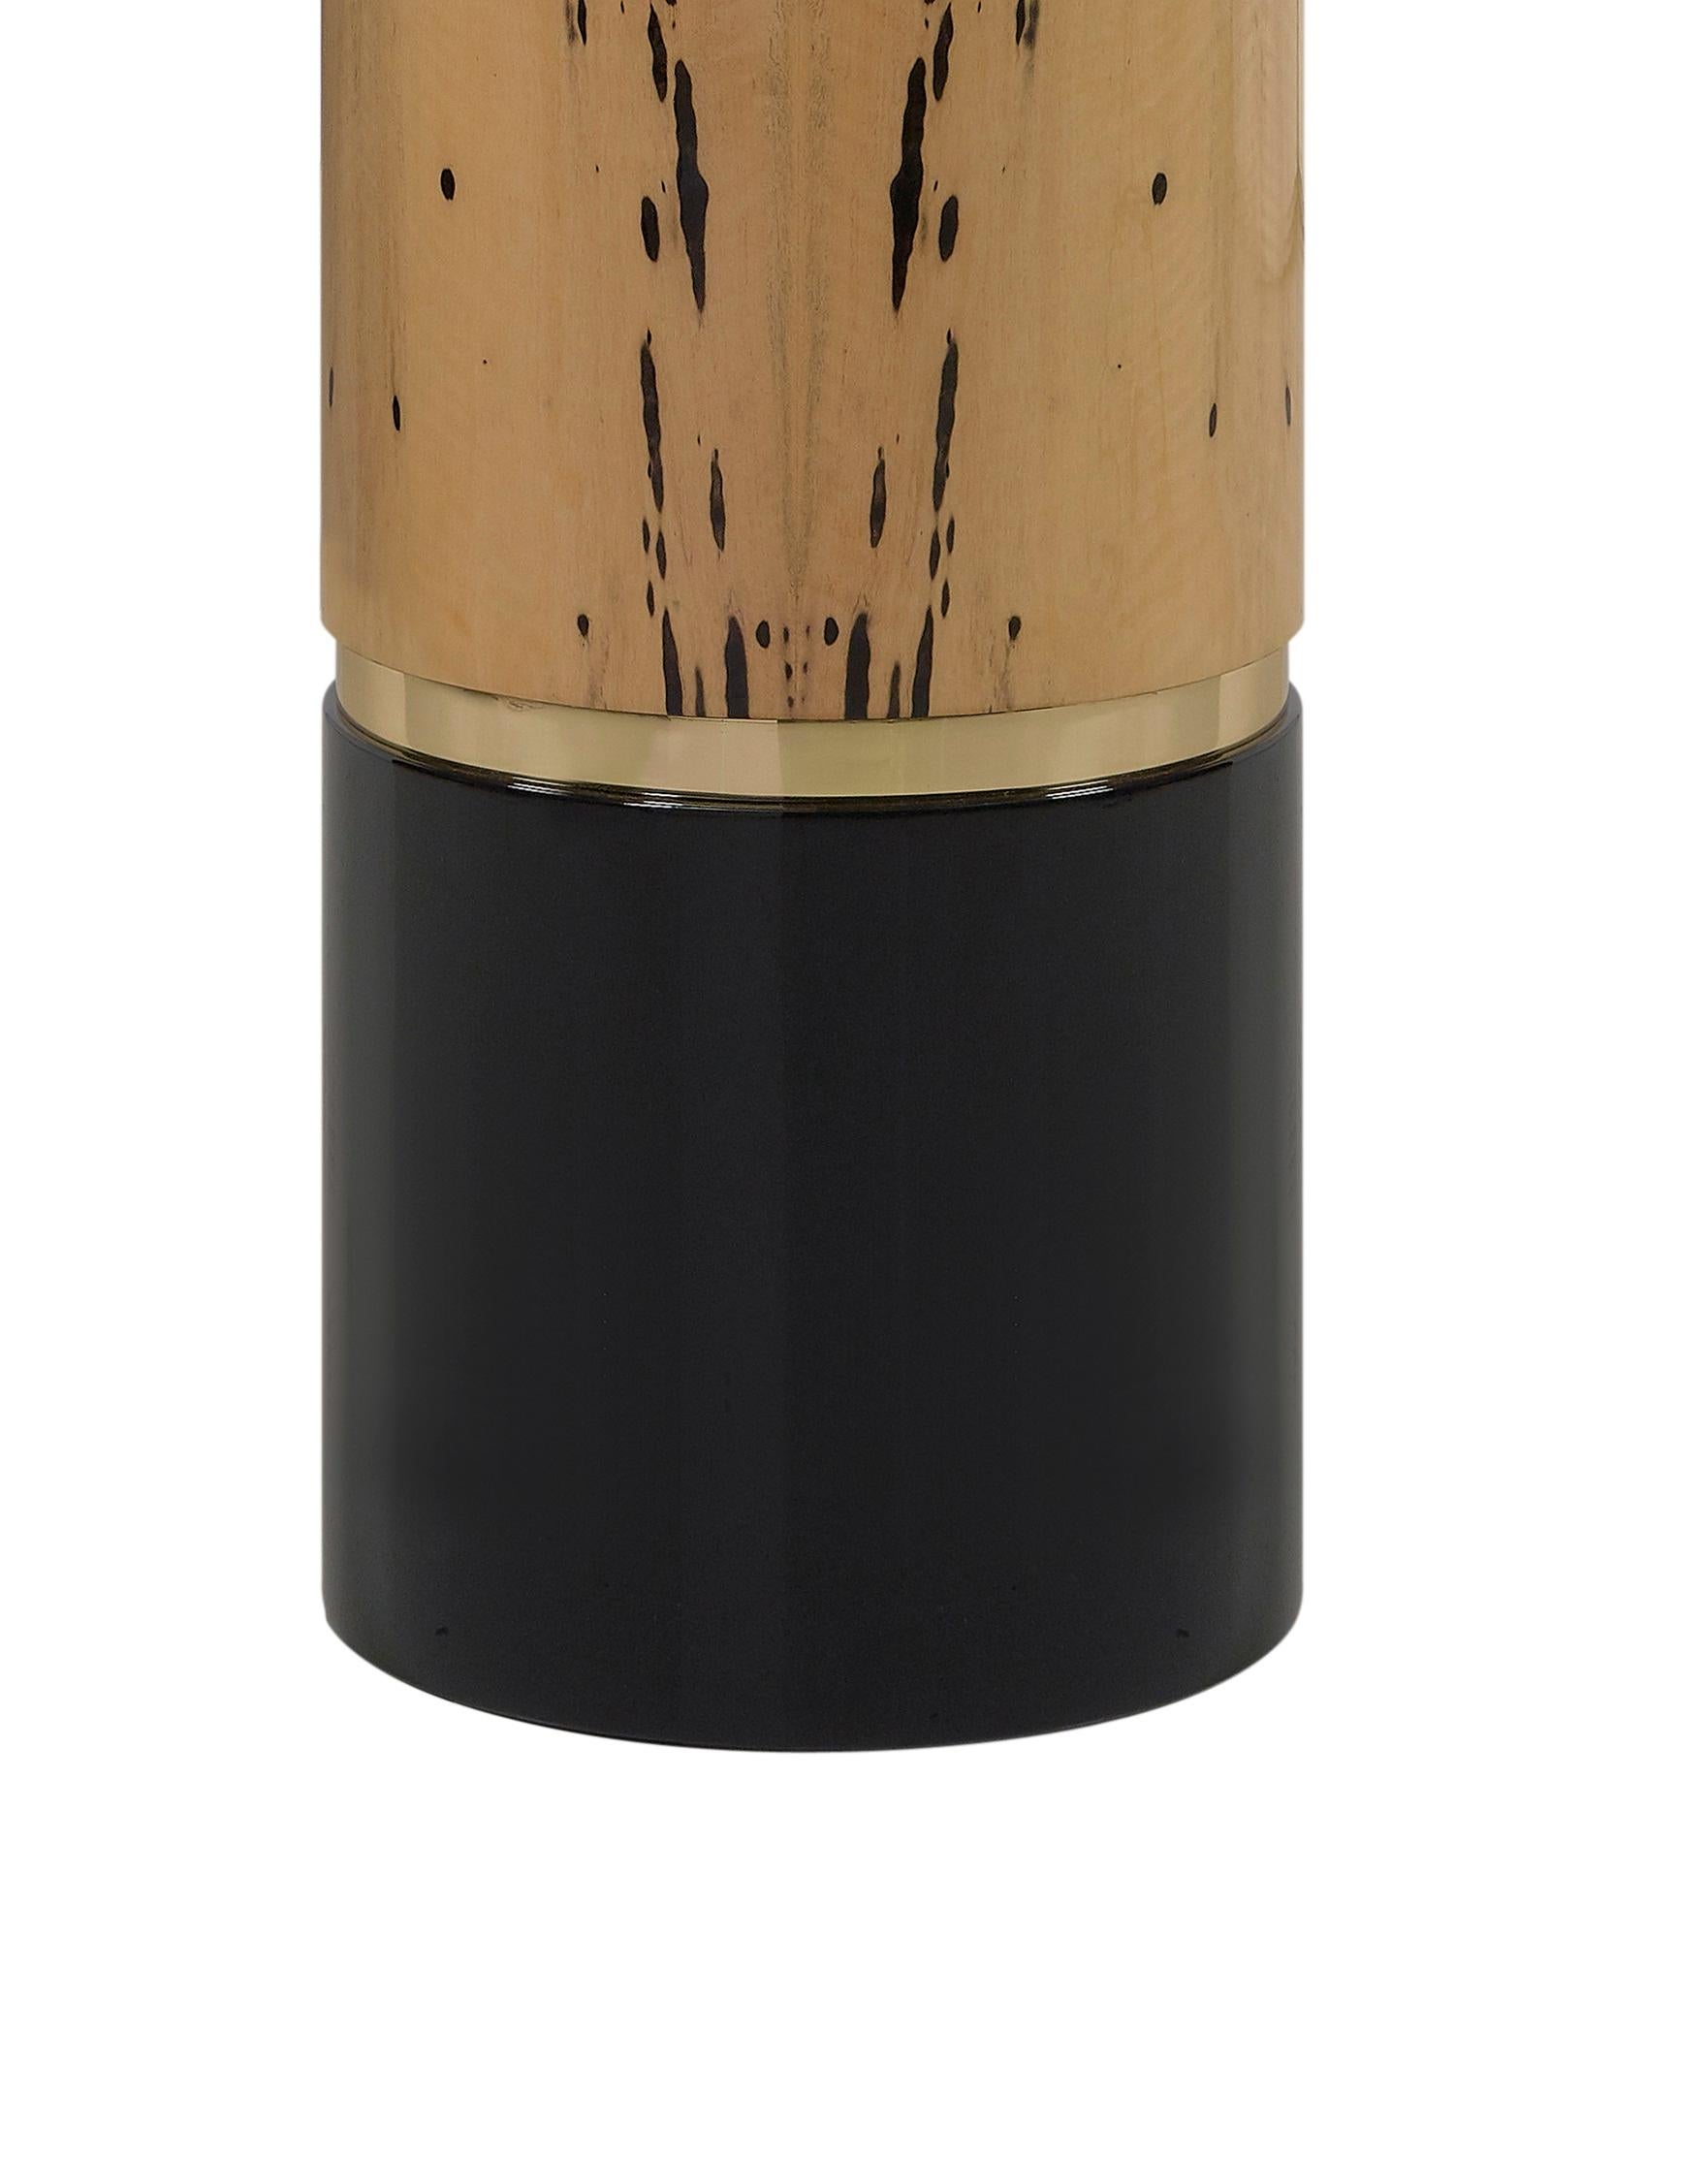 Royal Ebony Pedestal by Memoir Essence
Dimensions: D 35 x W 35 x H 110 cm.
Materials: Polished brass, lacquer and Royal ebony.

Also available in brushed brass. Please contact us.

An exquisite combination of royal ebony veneer and black lacquered